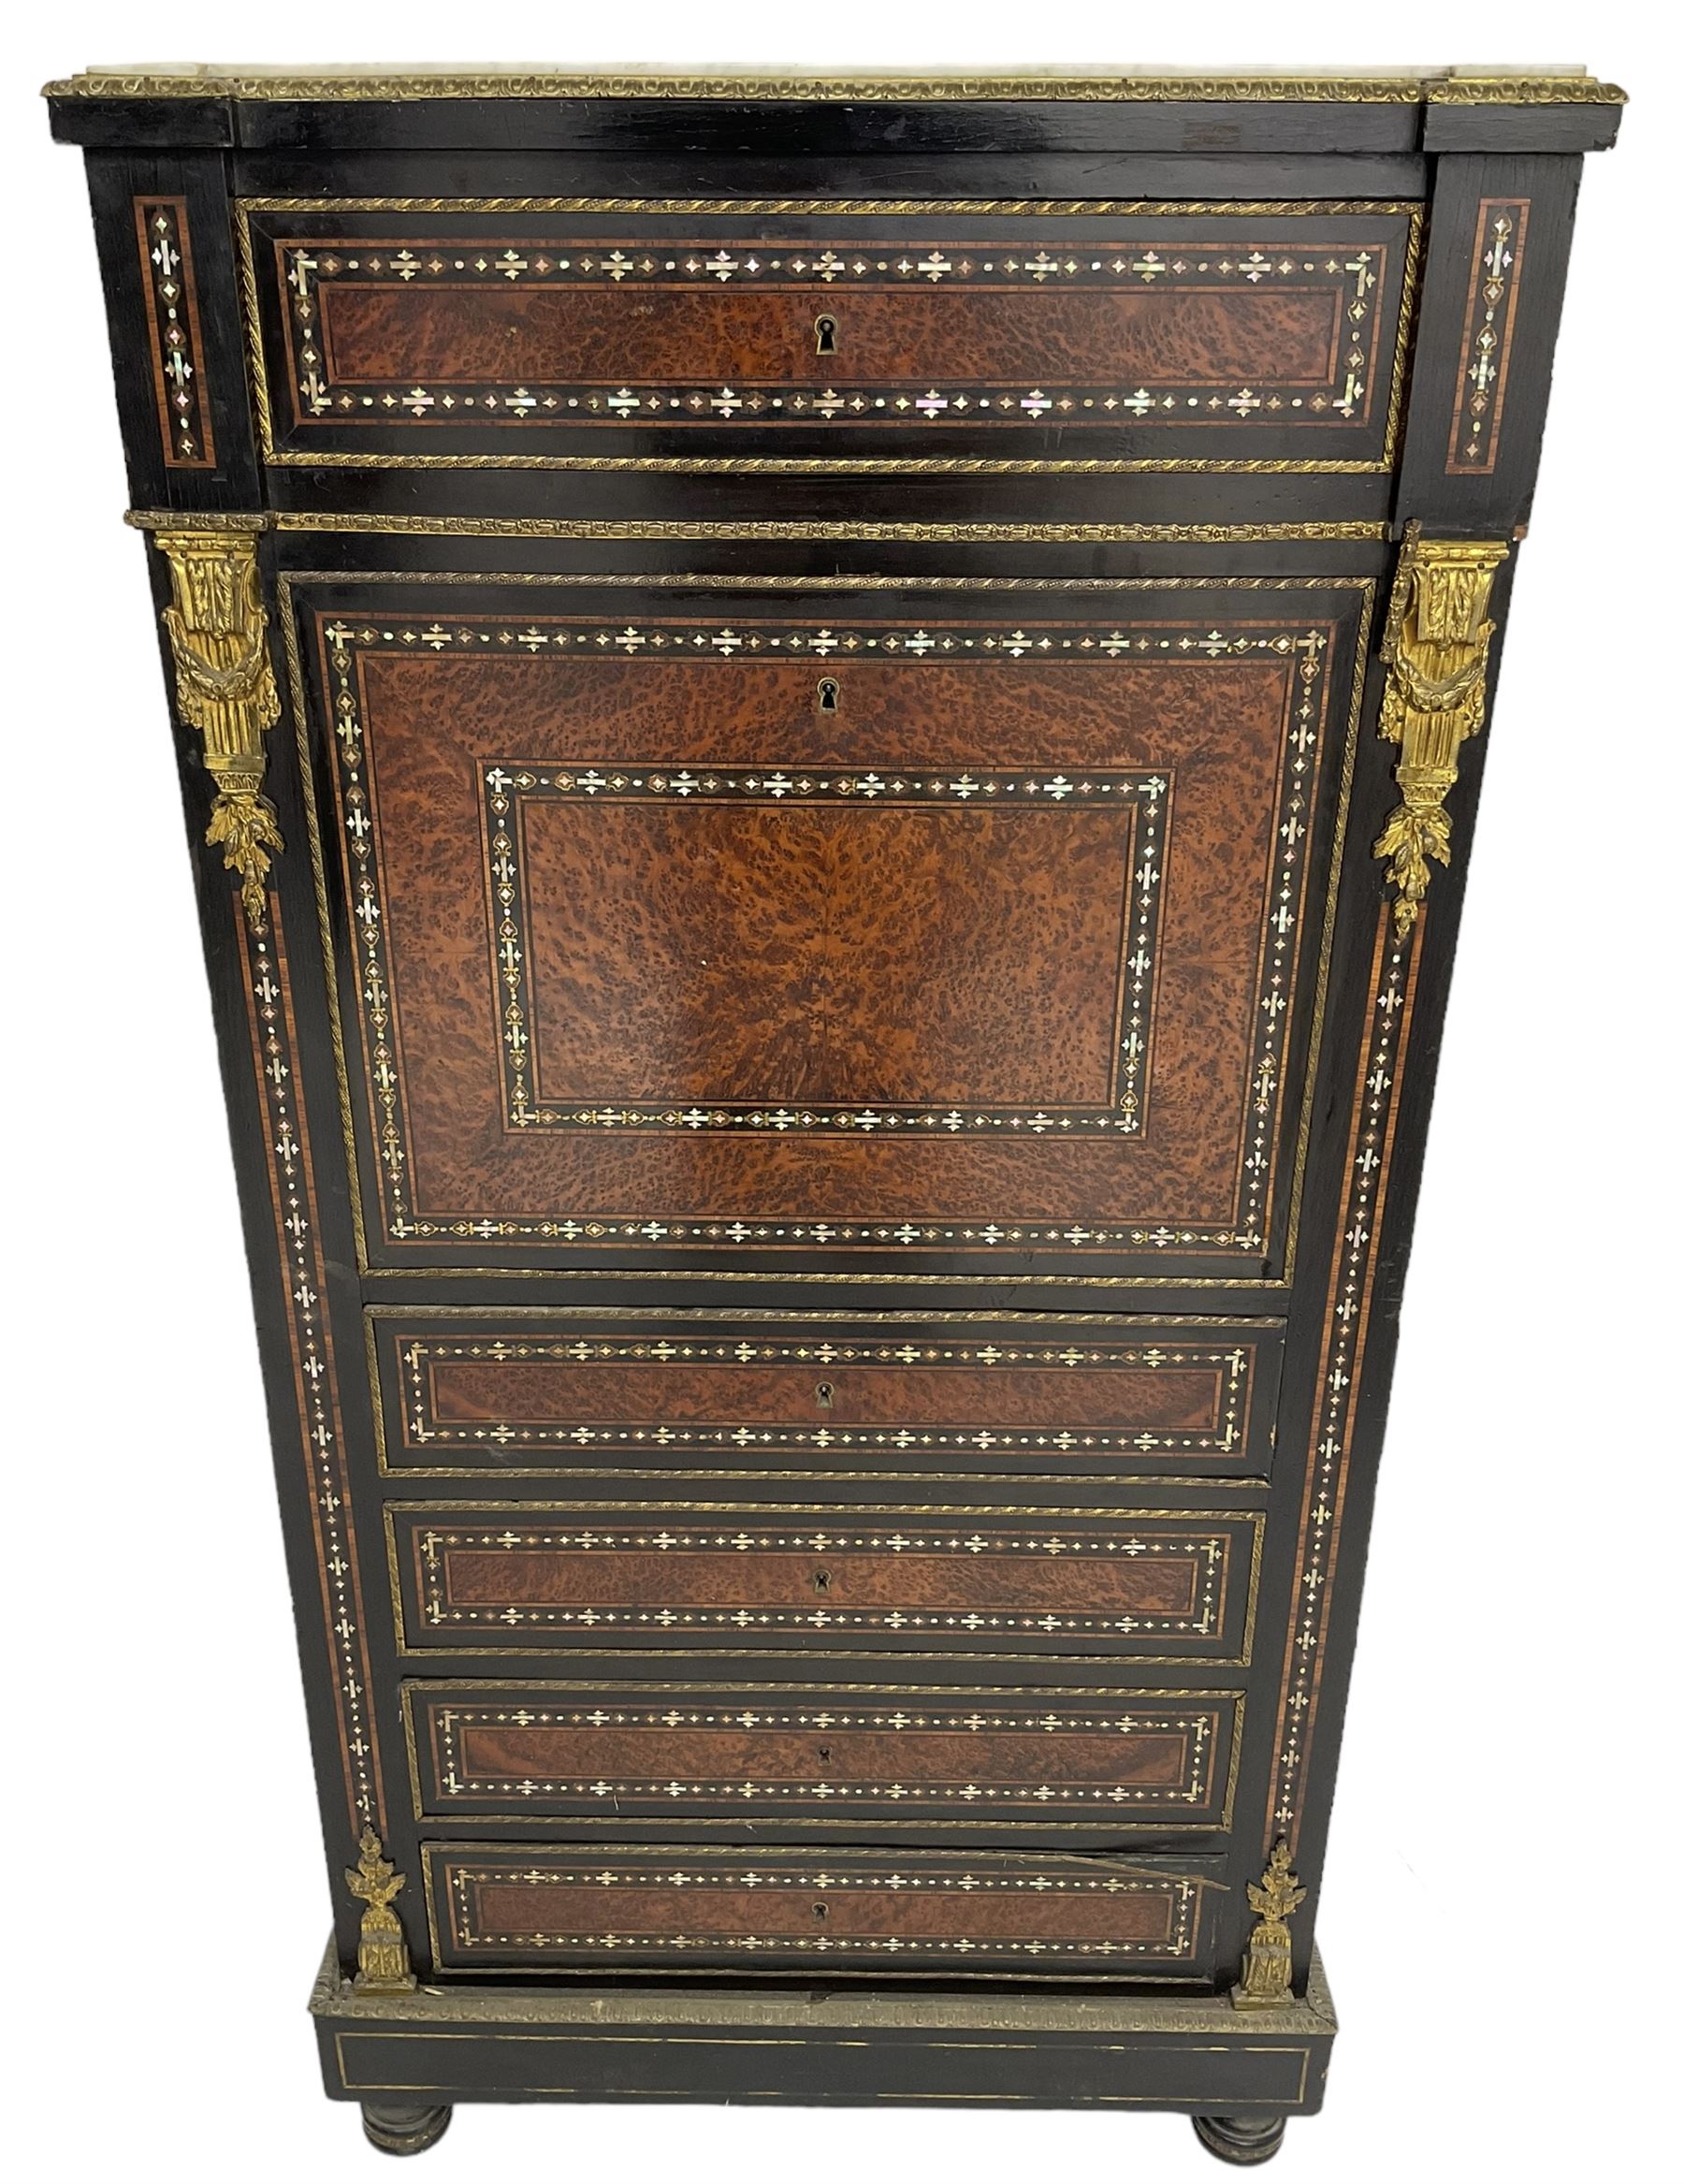 Late 19th century French ebonised and amboyna secrétaire à abattant - Image 7 of 8